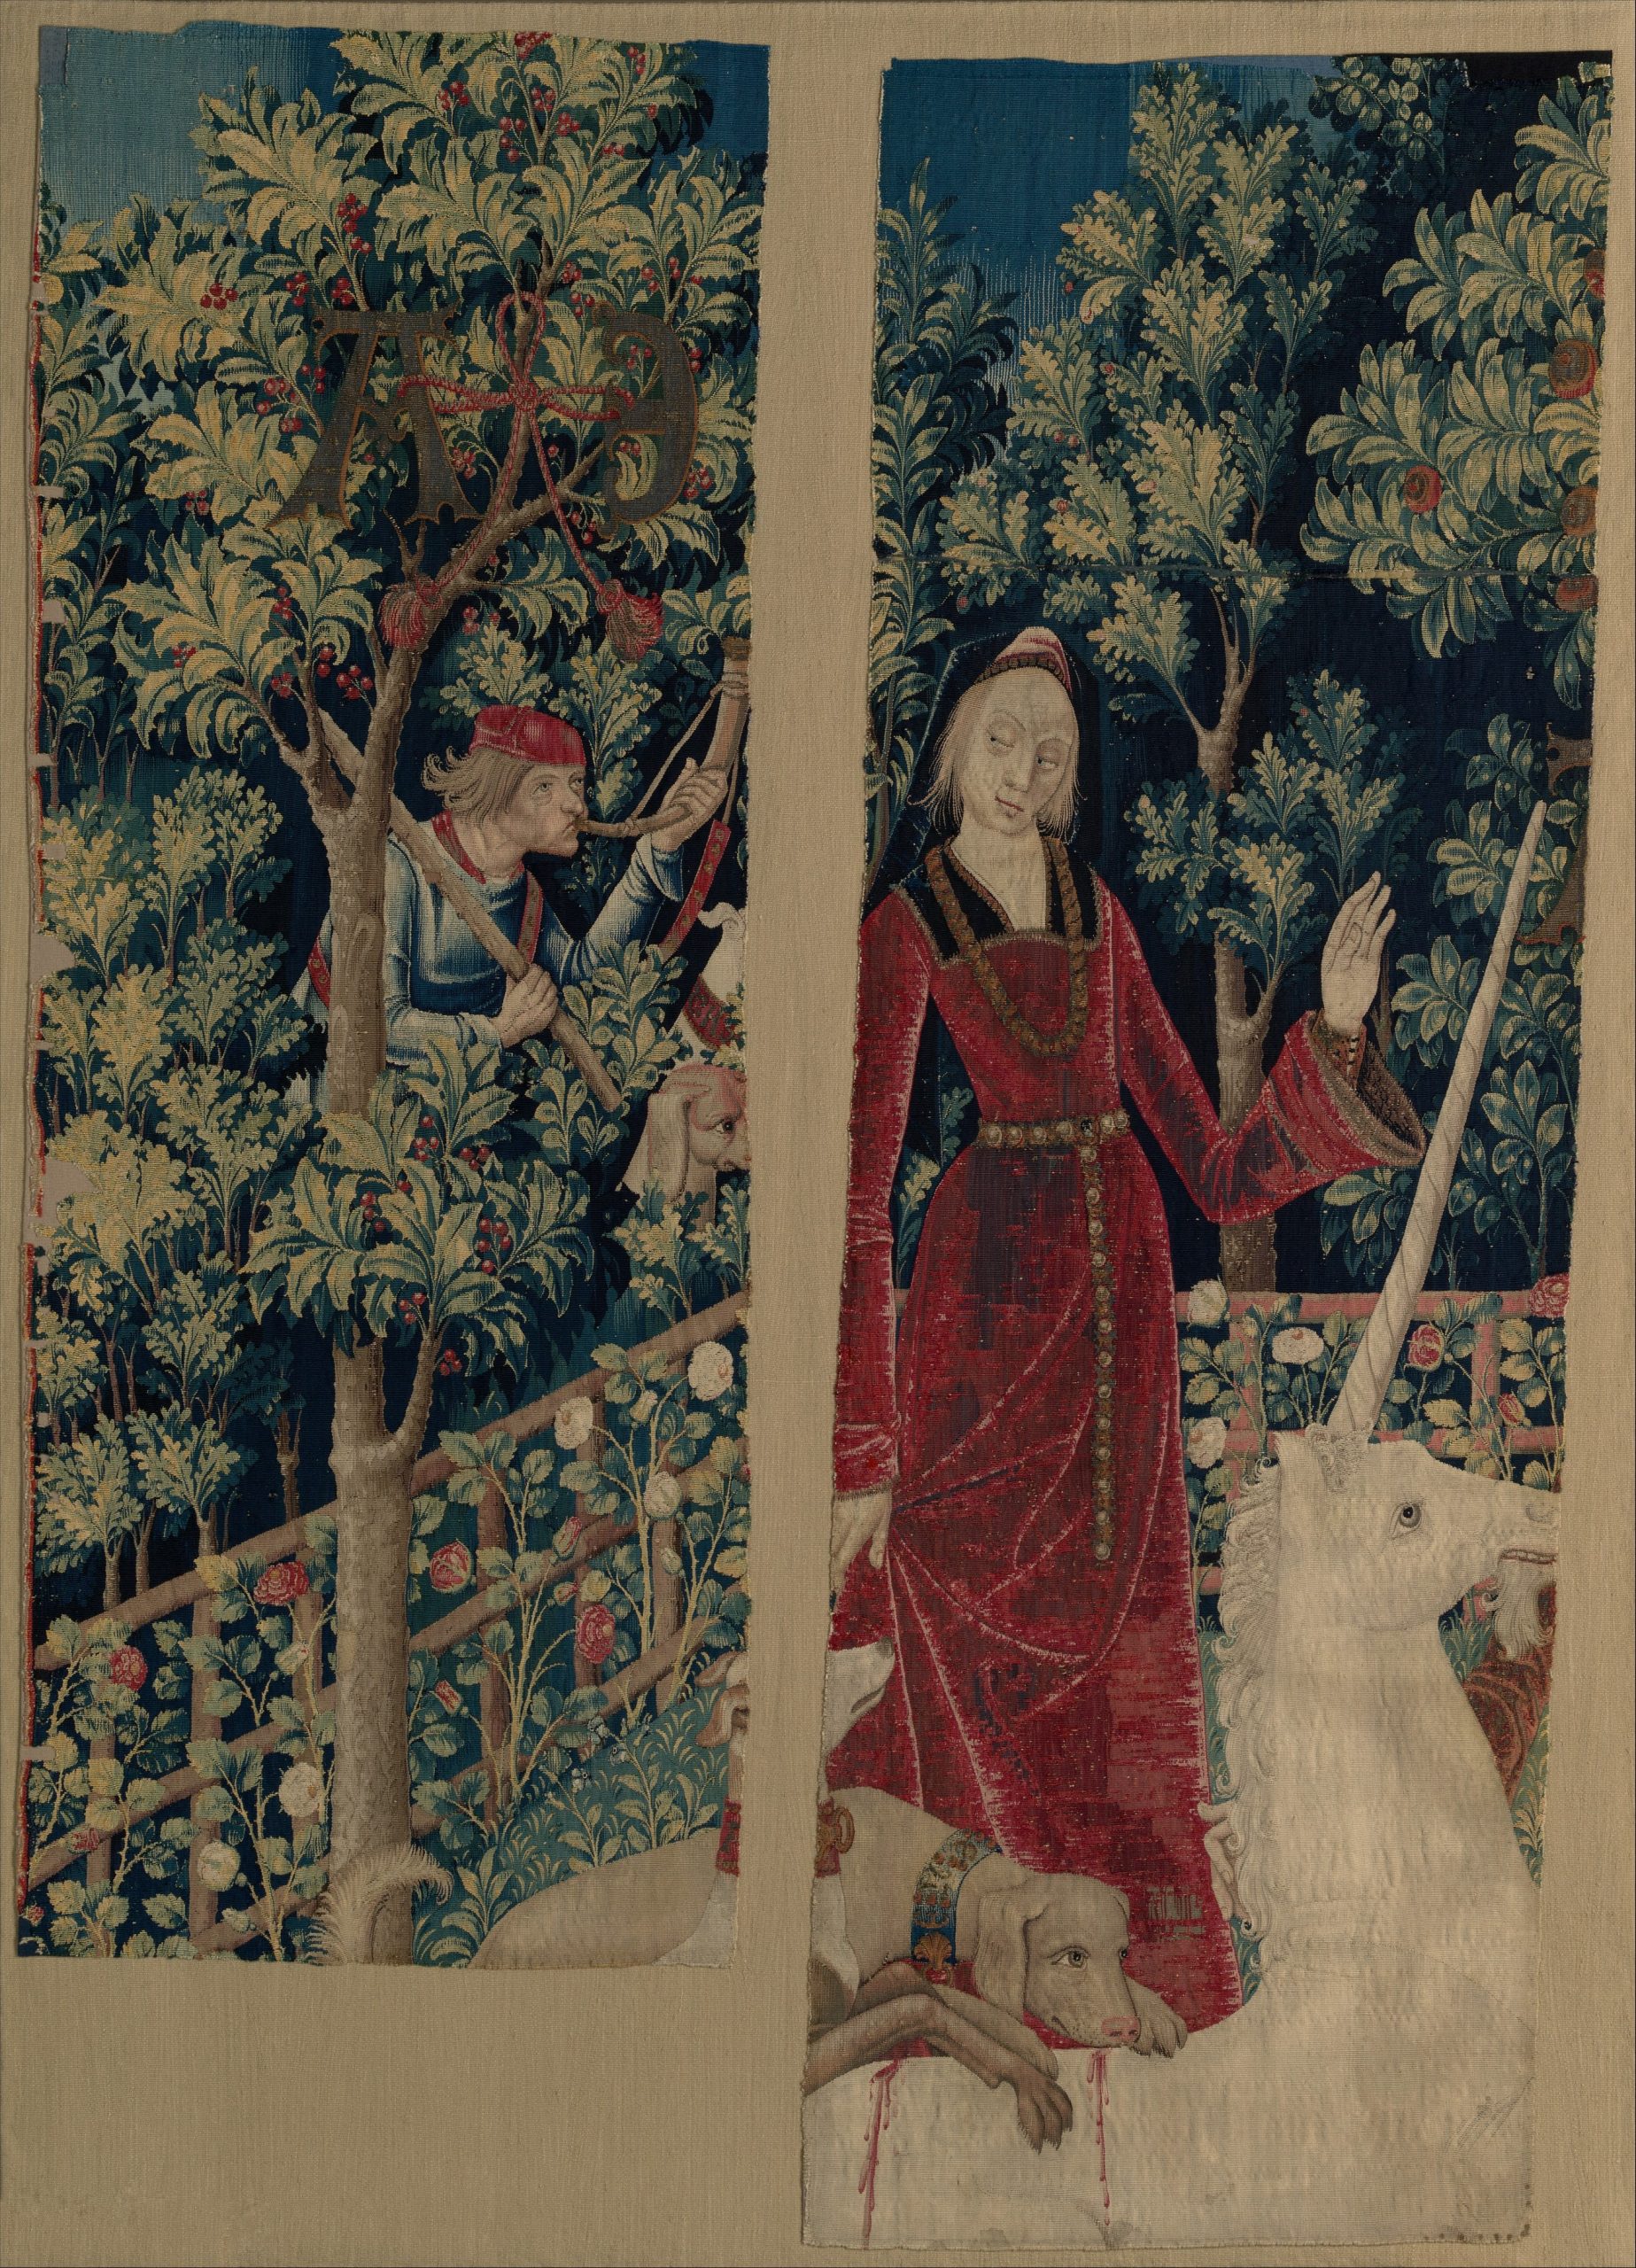 A lady stands with her arm raised next to a unicorn.